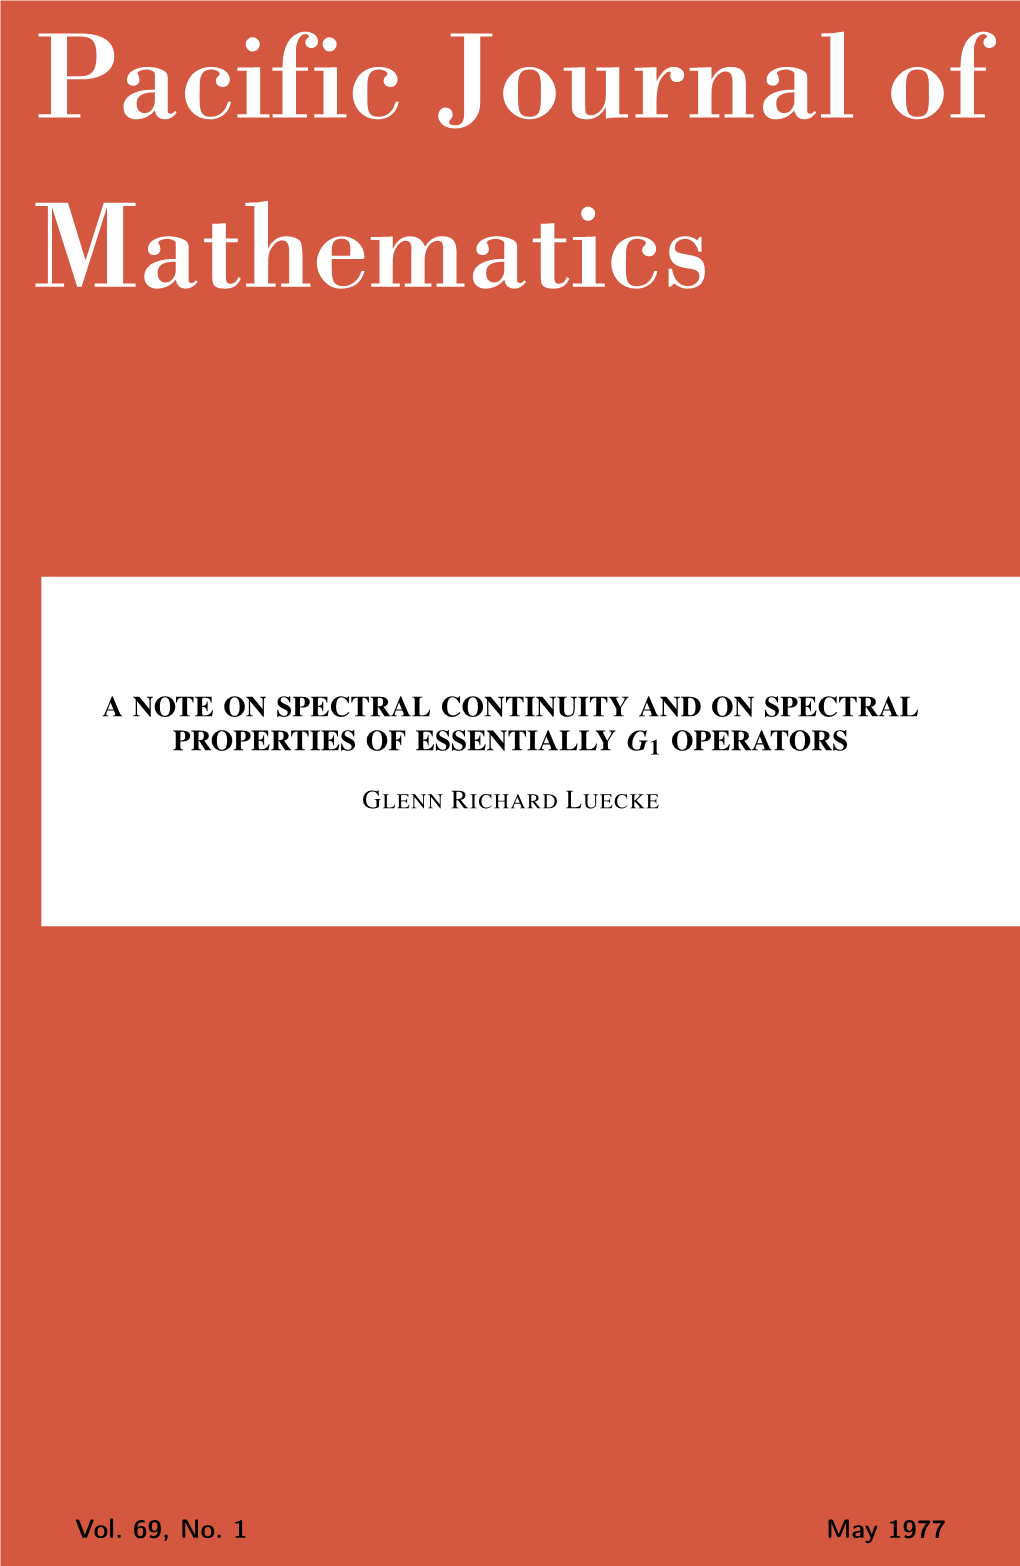 A Note on Spectral Continuity and on Spectral Properties of Essentially G1 Operators